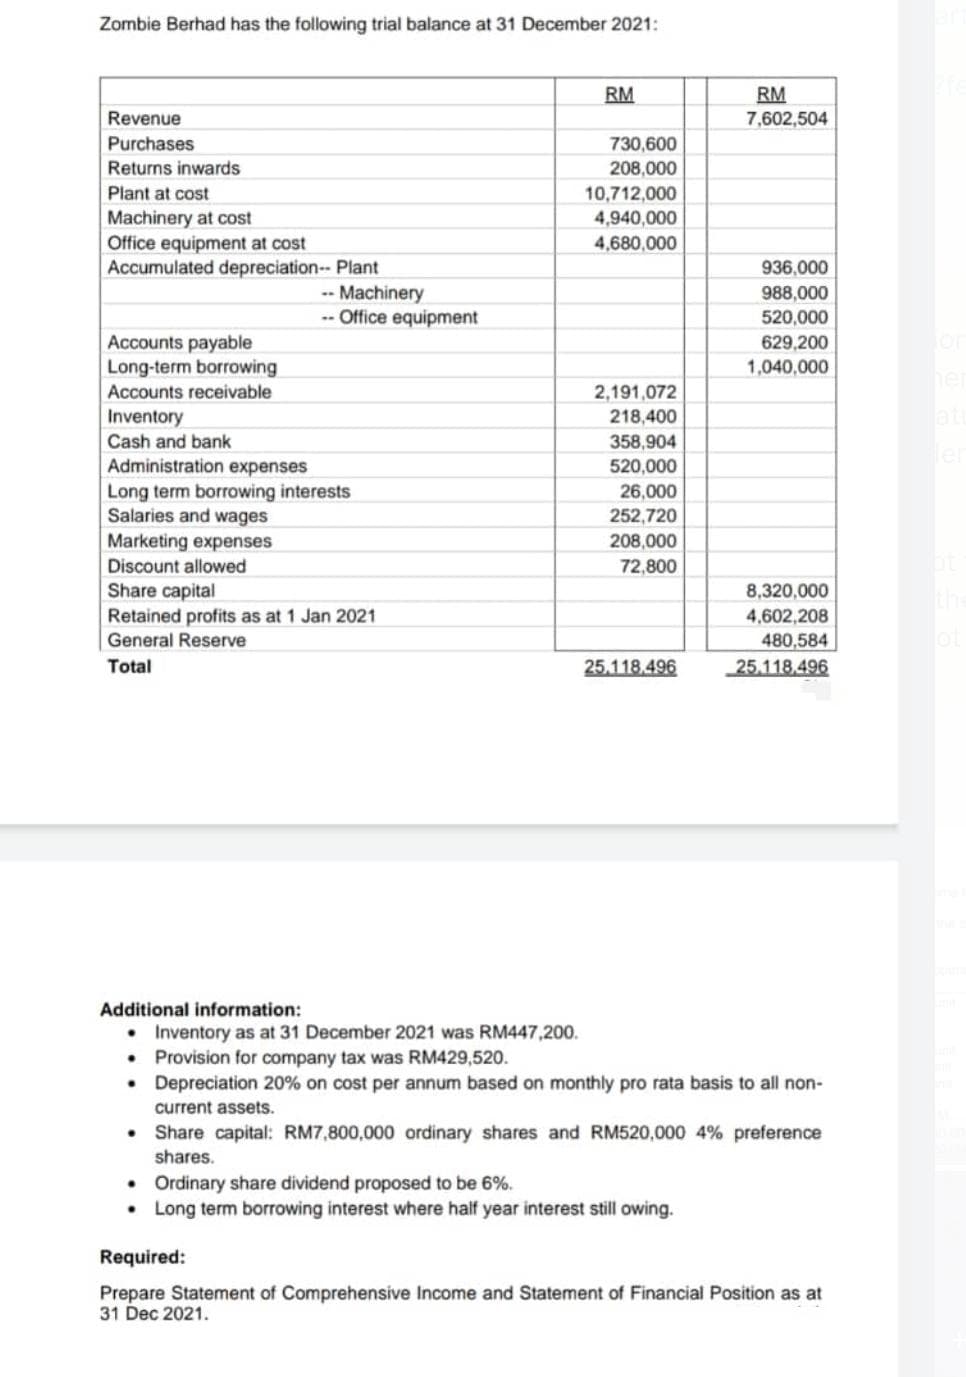 Zombie Berhad has the following trial balance at 31 December 2021:
RM
RM
7,602,504
Revenue
Purchases
730,600
Returns inwards
208,000
Plant at cost
10,712,000
Machinery at cost
4,940,000
Office equipment at cost
4,680,000
Accumulated depreciation-- Plant
936,000
988,000
520,000
Accounts payable
629,200
Long-term borrowing
1,040,000
Accounts receivable
2,191,072
Inventory
218,400
Cash and bank
358,904
Administration expenses
520,000
Long term borrowing interests
26,000
Salaries and wages
252,720
Marketing expenses
208,000
Discount allowed
72,800
Share capital
8,320,000
4,602,208
Retained profits as at 1 Jan 2021
General Reserve
480,584
Total
25.118.496
25.118.496
Additional information:
• Inventory as at 31 December 2021 was RM447,200.
.
Provision for company tax was RM429,520.
• Depreciation 20% on cost per annum based on monthly pro rata basis to all non-
current assets.
.
Share capital: RM7,800,000 ordinary shares and RM520,000 4% preference
shares.
• Ordinary share dividend proposed to be 6%.
•
Long term borrowing interest where half year interest still owing.
Required:
Prepare Statement of Comprehensive Income and Statement of Financial Position as at
31 Dec 2021.
Machinery
-- Office equipment